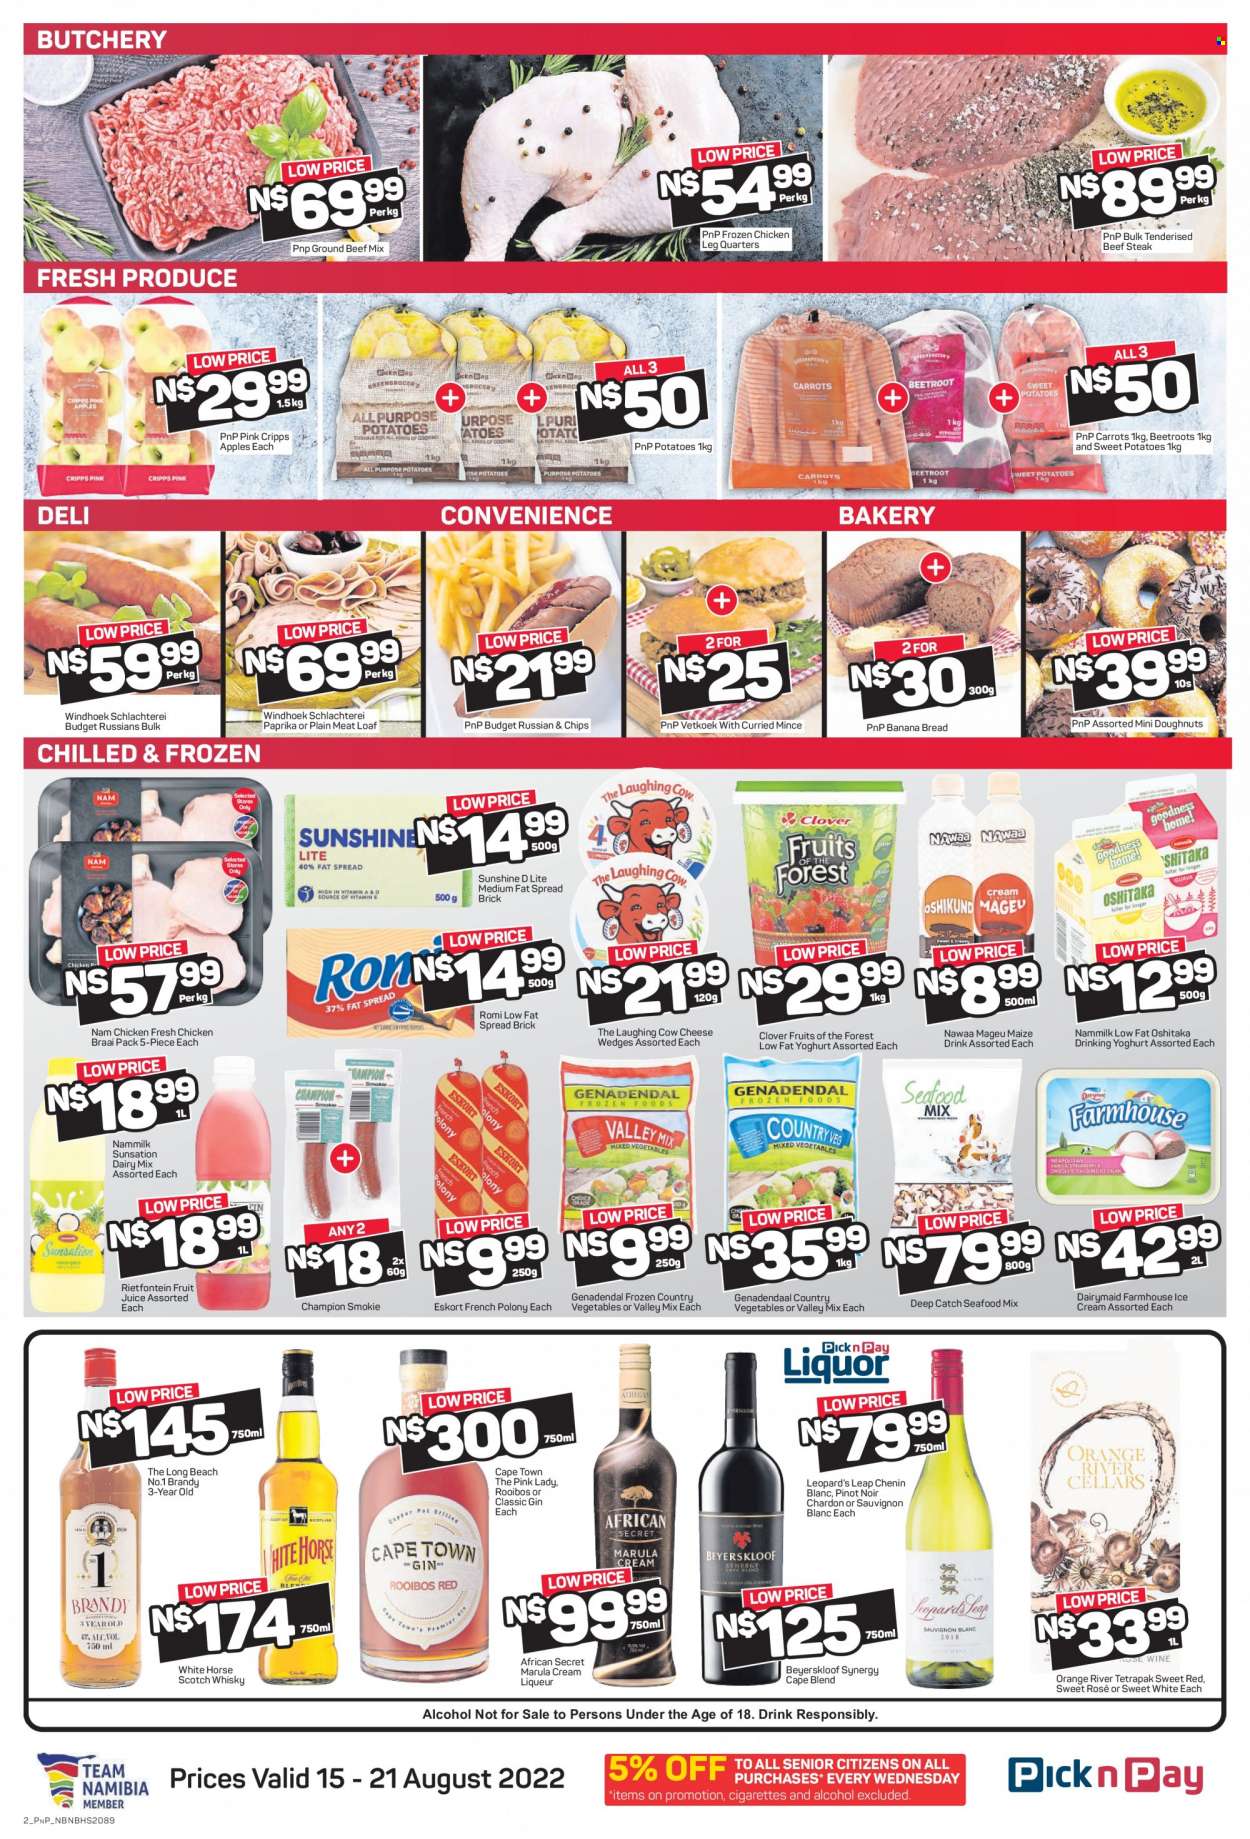 Pick n Pay catalogue  - 15/08/2022 - 21/08/2022 - Sales products - bread, donut, banana bread, carrots, sweet potato, potatoes, oranges, apples, Pink Lady, seafood, french polony, polony, russians, cheese, The Laughing Cow, yoghurt, Clover, yoghurt drink, Number 1 Mageu, fat spread, Sunshine, ice cream, fruit juice, juice, rooibos tea, red wine, white wine, wine, Pinot Noir, alcohol, Chenin Blanc, Sauvignon Blanc, rosé wine, brandy, gin, liqueur, scotch whisky, whisky, chicken legs, beef meat, beef steak, ground beef, steak. Page 3.